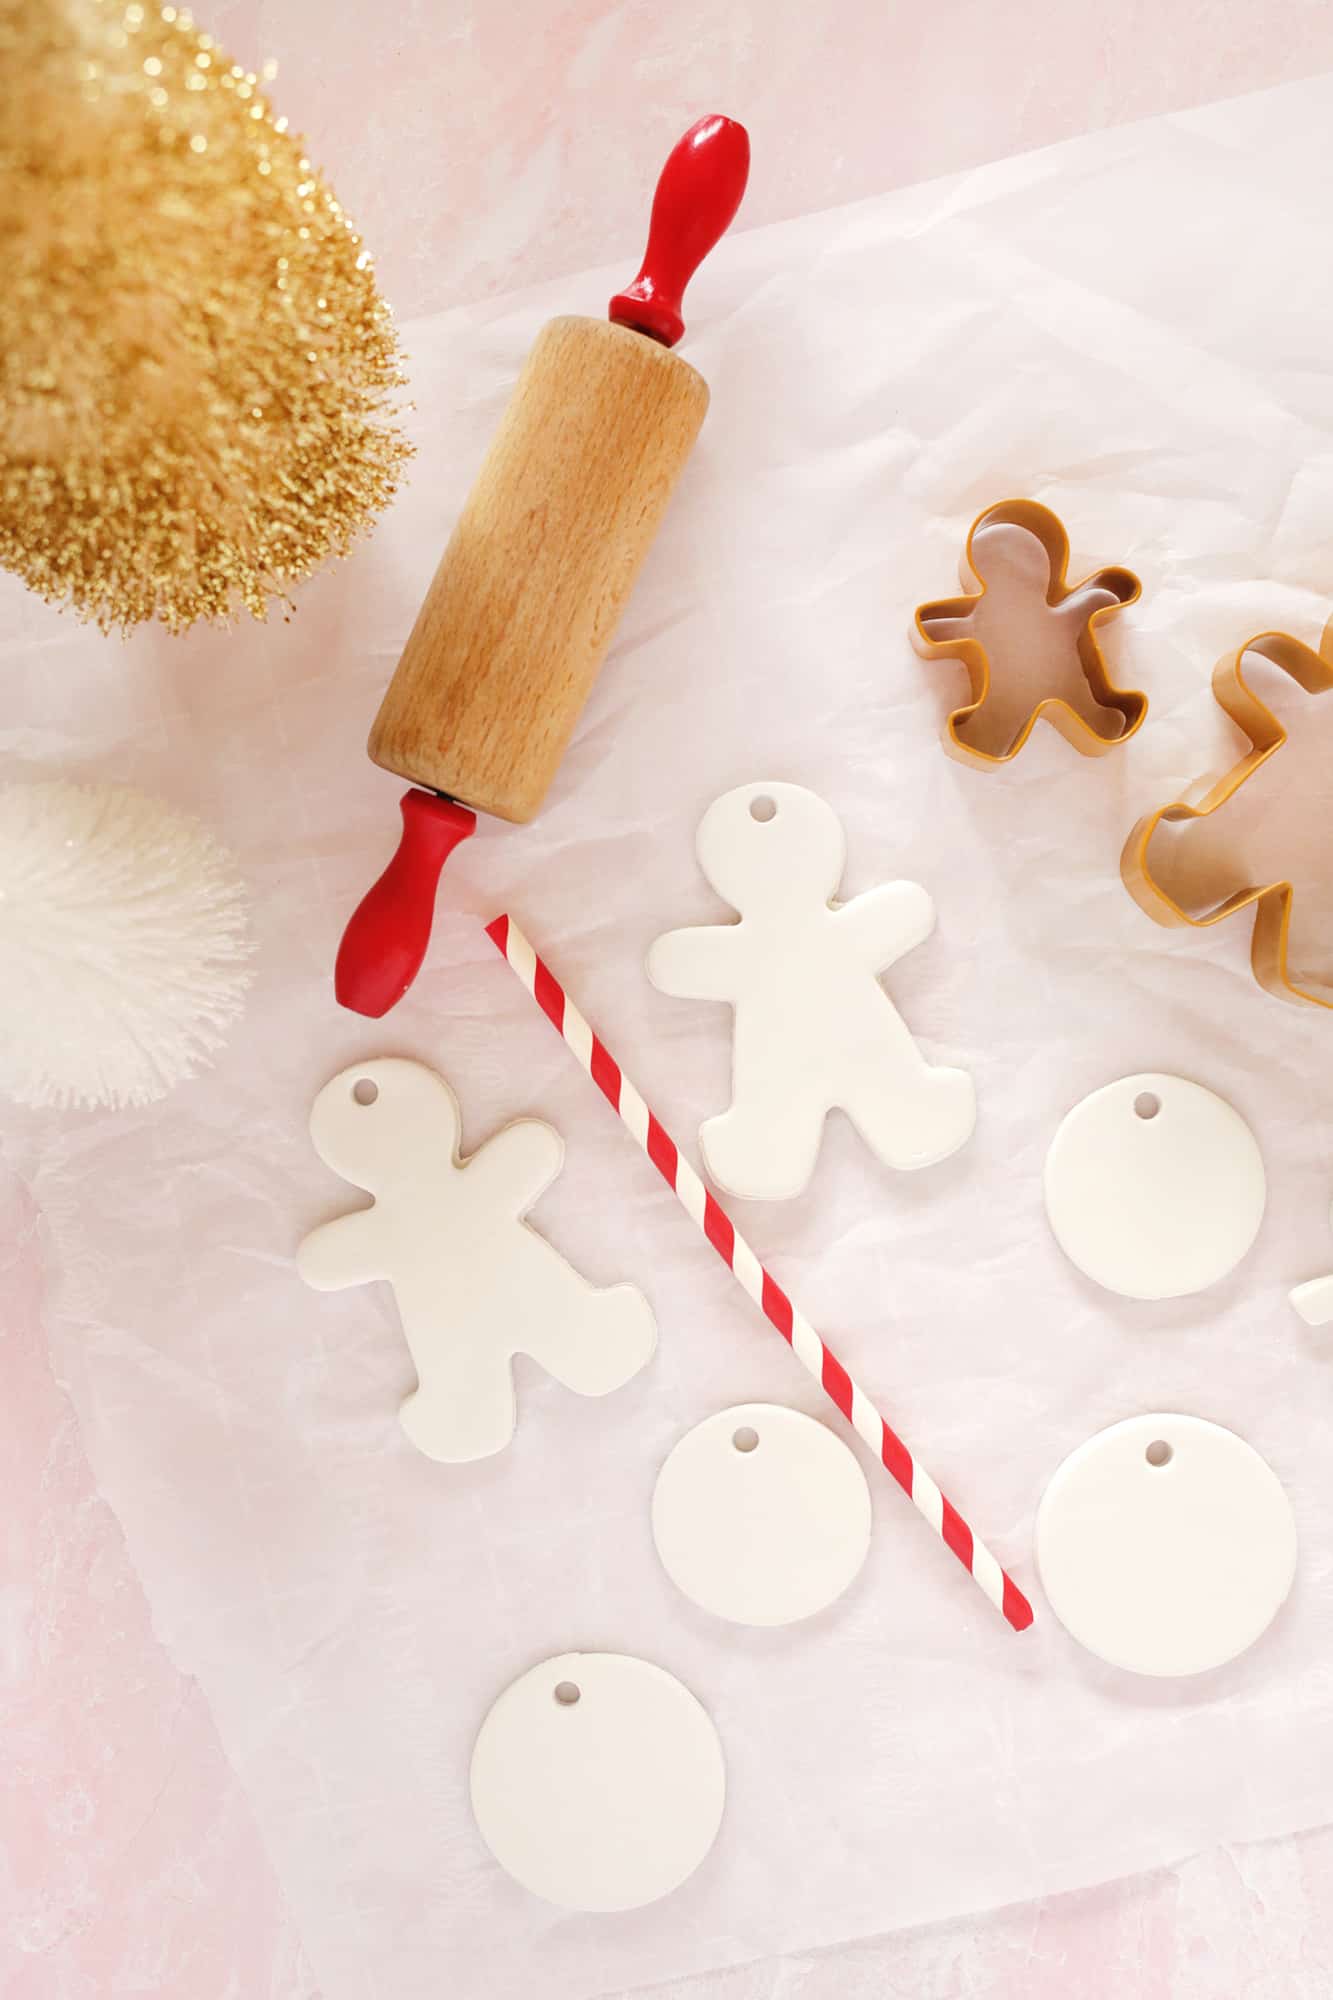 gingerbread people and circle ornaments made from clay with a rolling pin and red and white straw by them